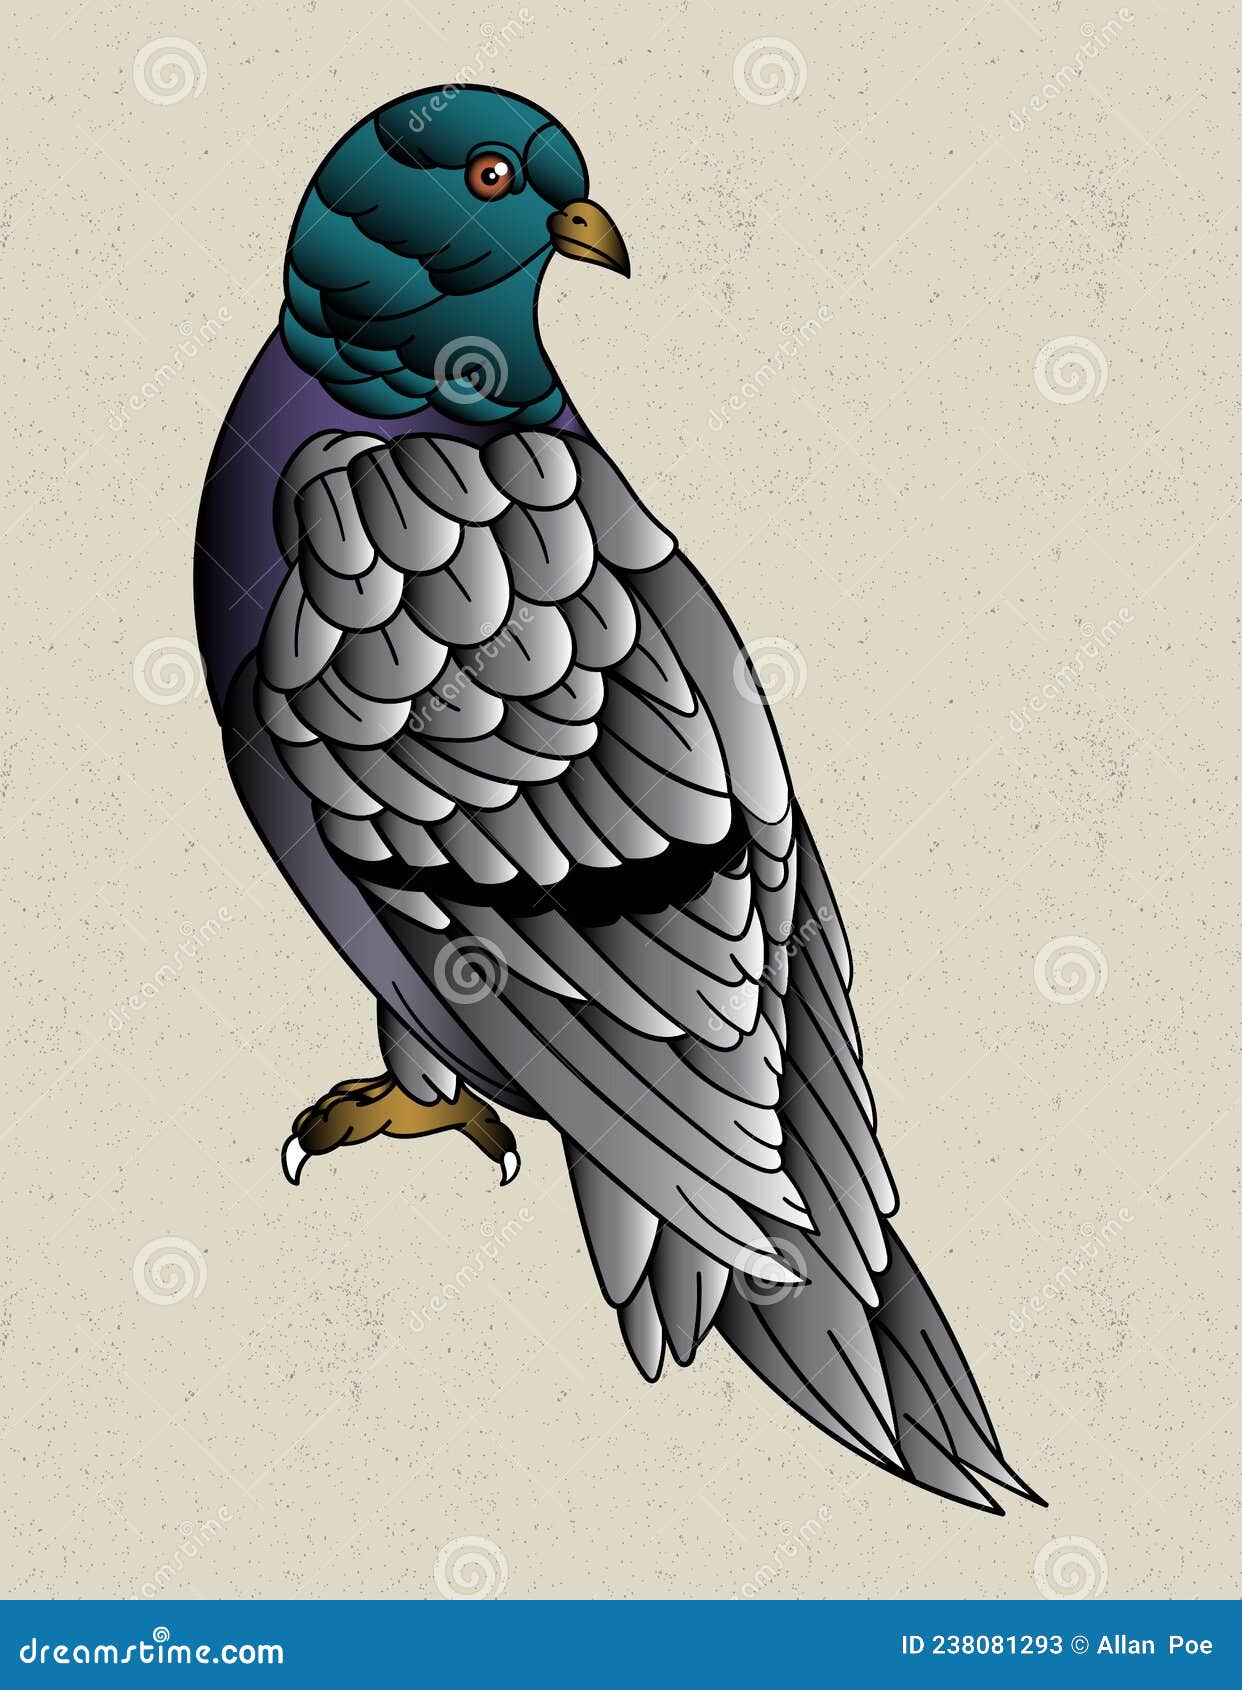 photo tattoo pigeon 03032019 097  idea for drawing pigeon tattoo   tattoovaluenet  tattoovaluenet